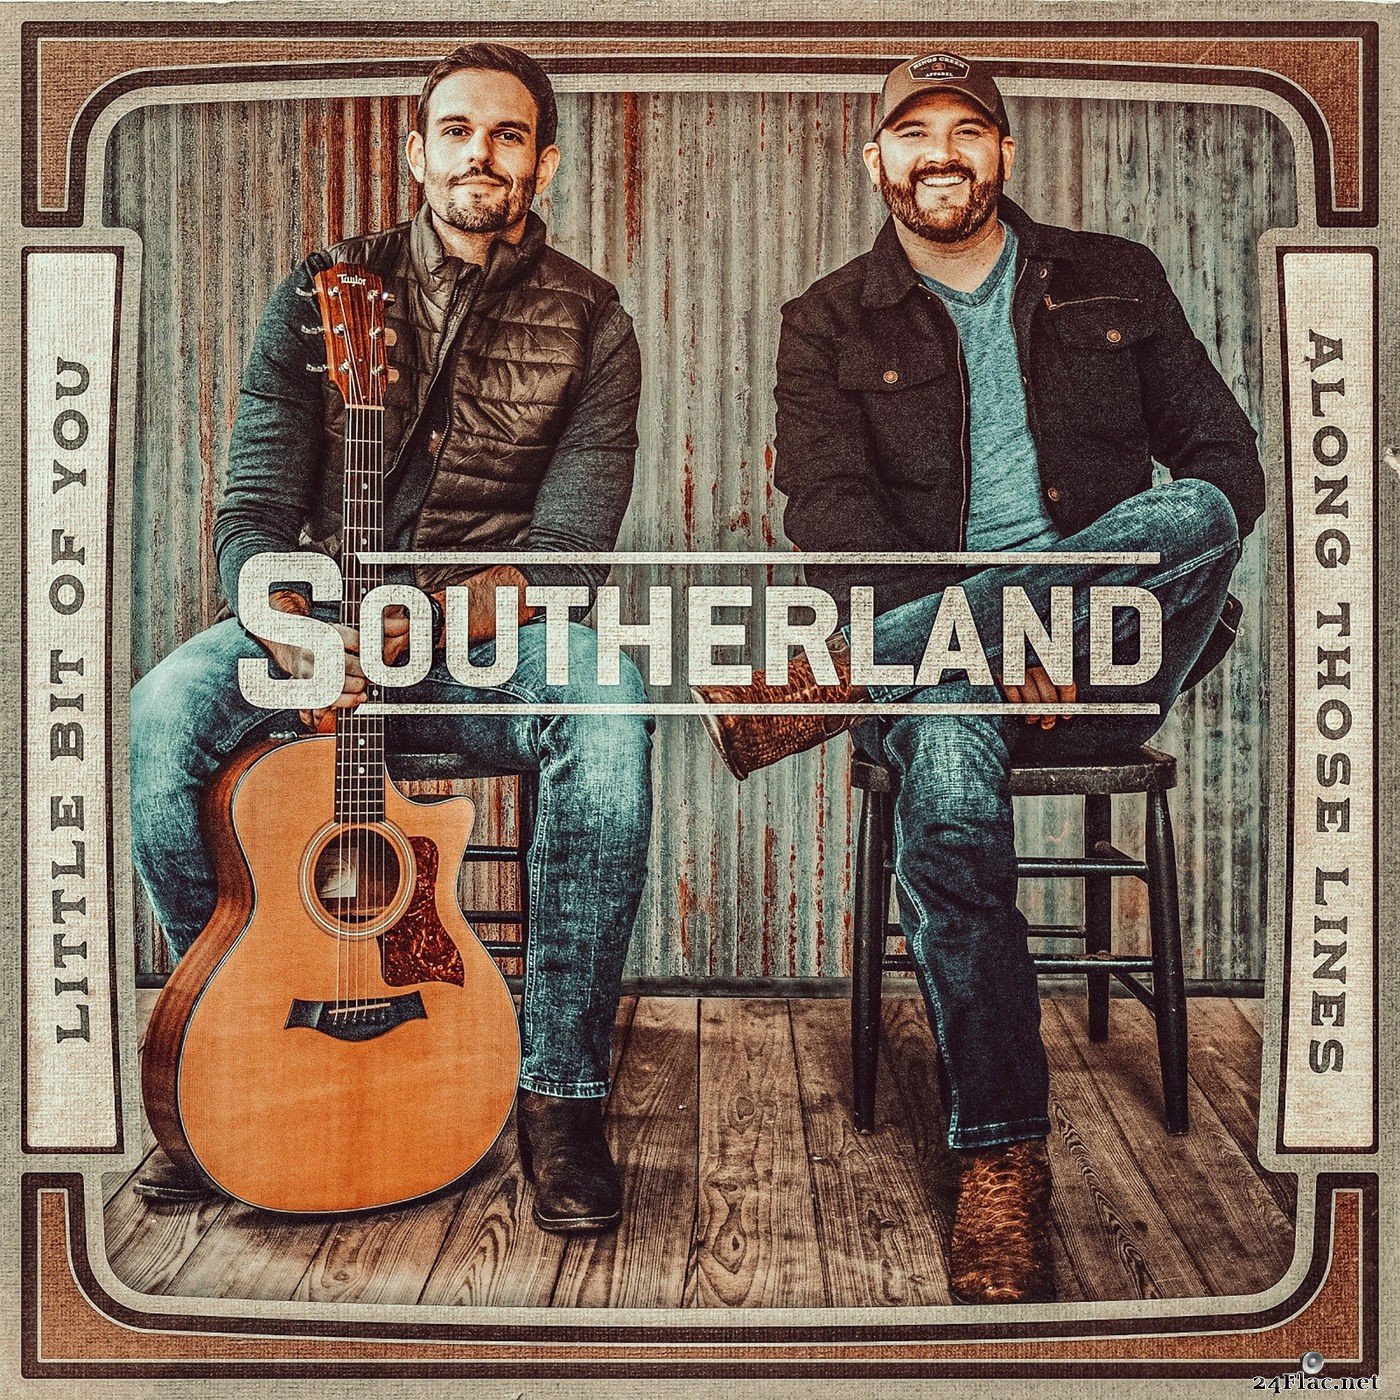 Southerland - Little Bit Of You + Along Those Lines (Single) (2021) Hi-Res